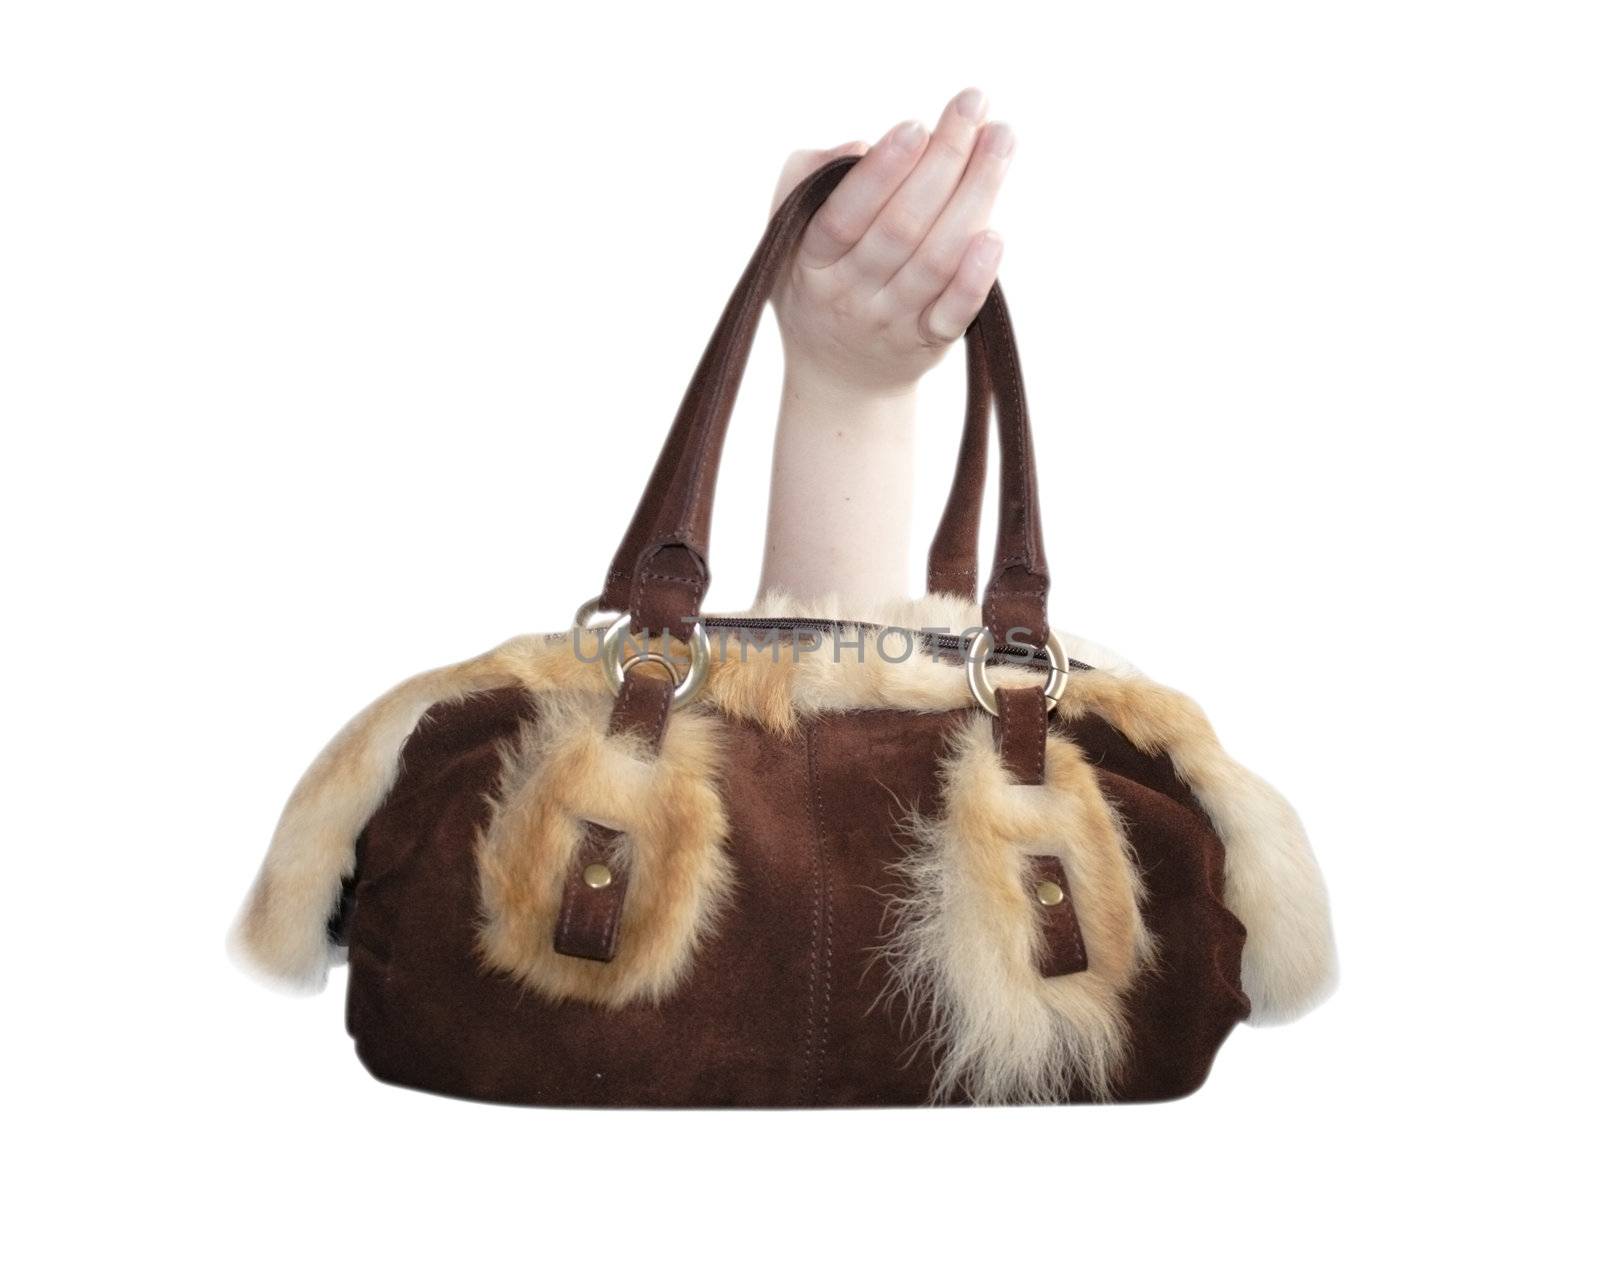 Female bag in a hand, leather bag with fur inserts